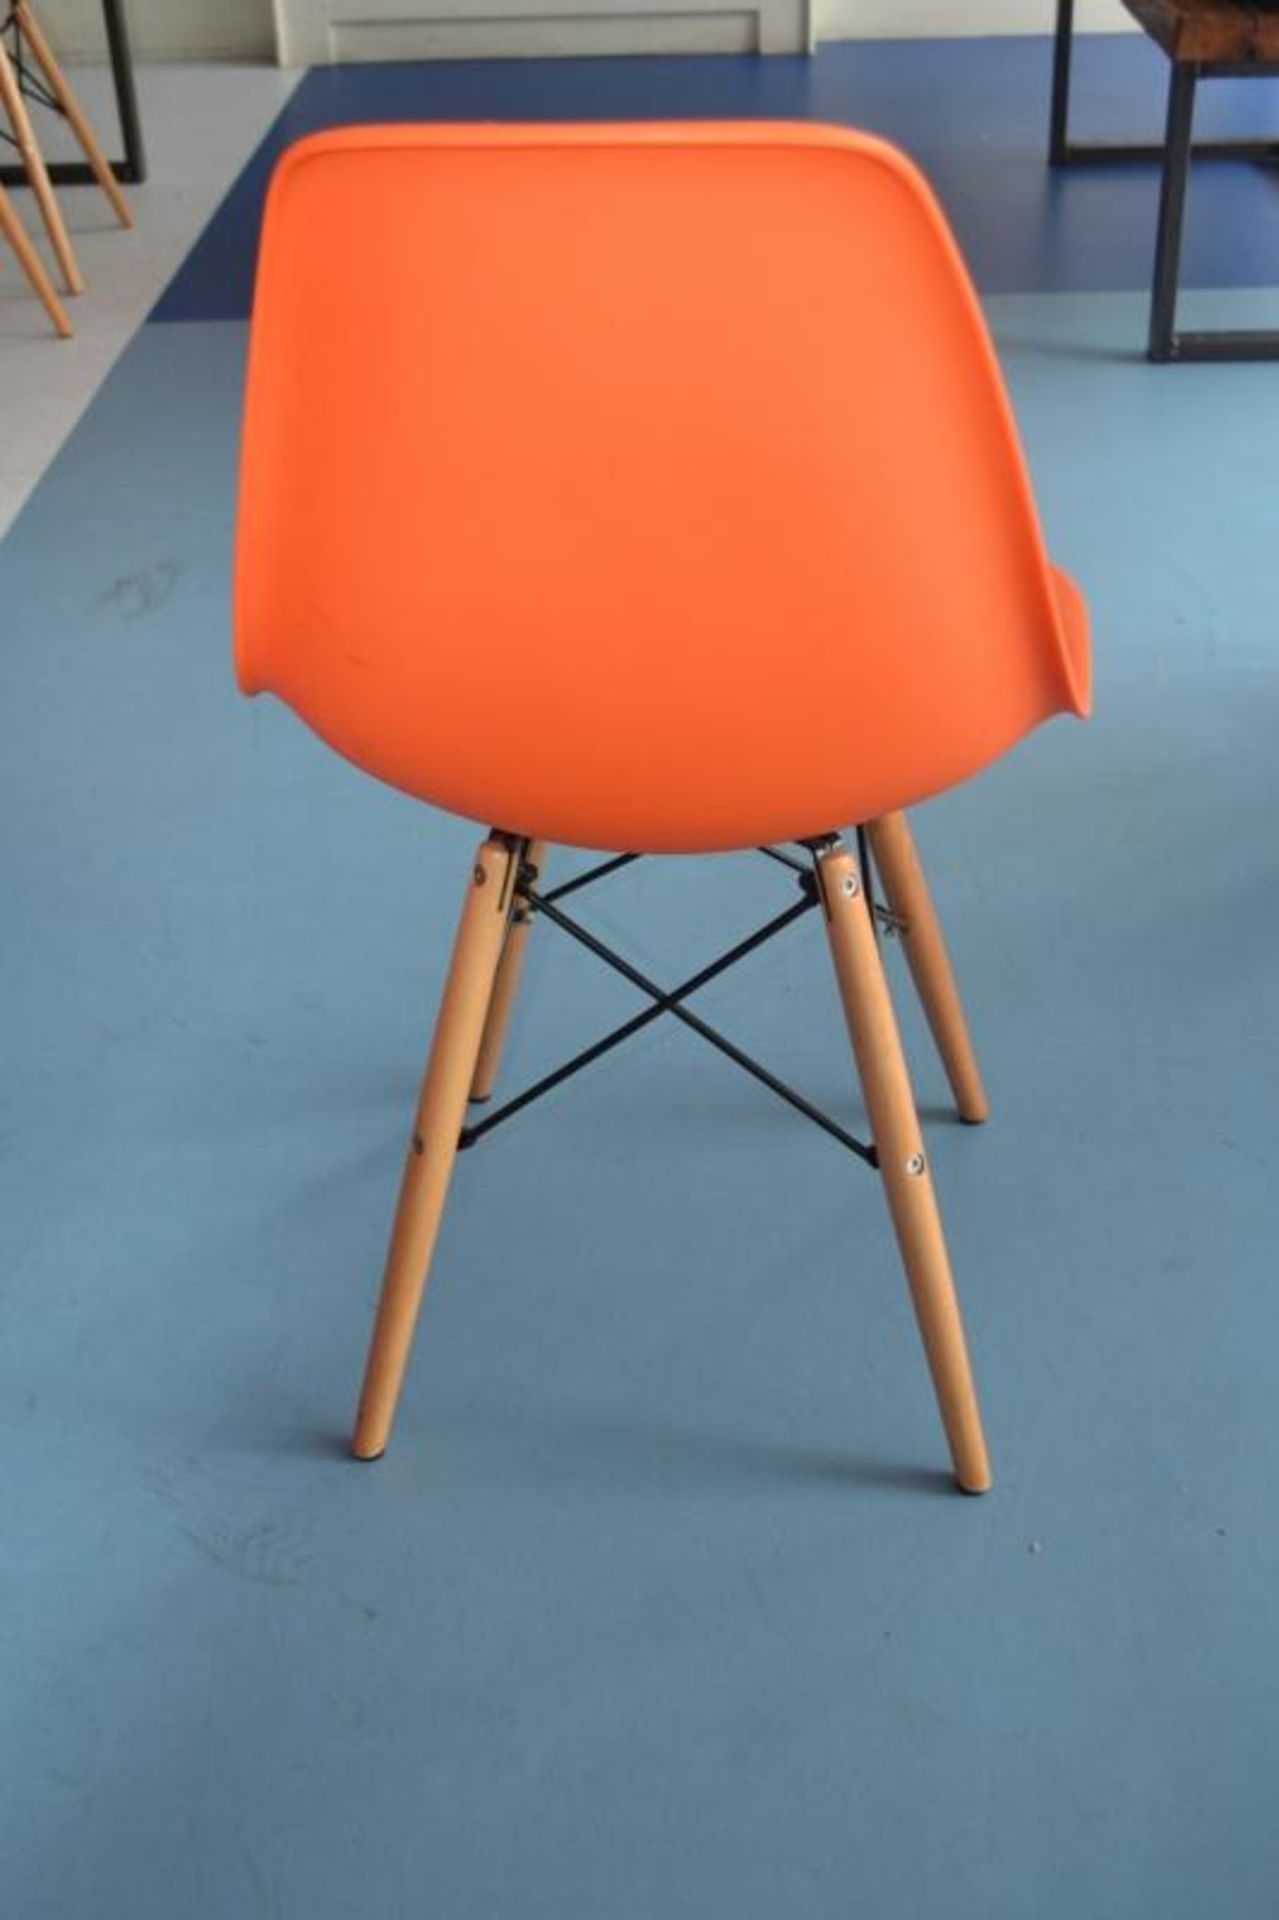 12 x Children's Orange and Red Charles and Ray Eames Style Shell Chairs - CL425 - Location: Altrinch - Image 4 of 8